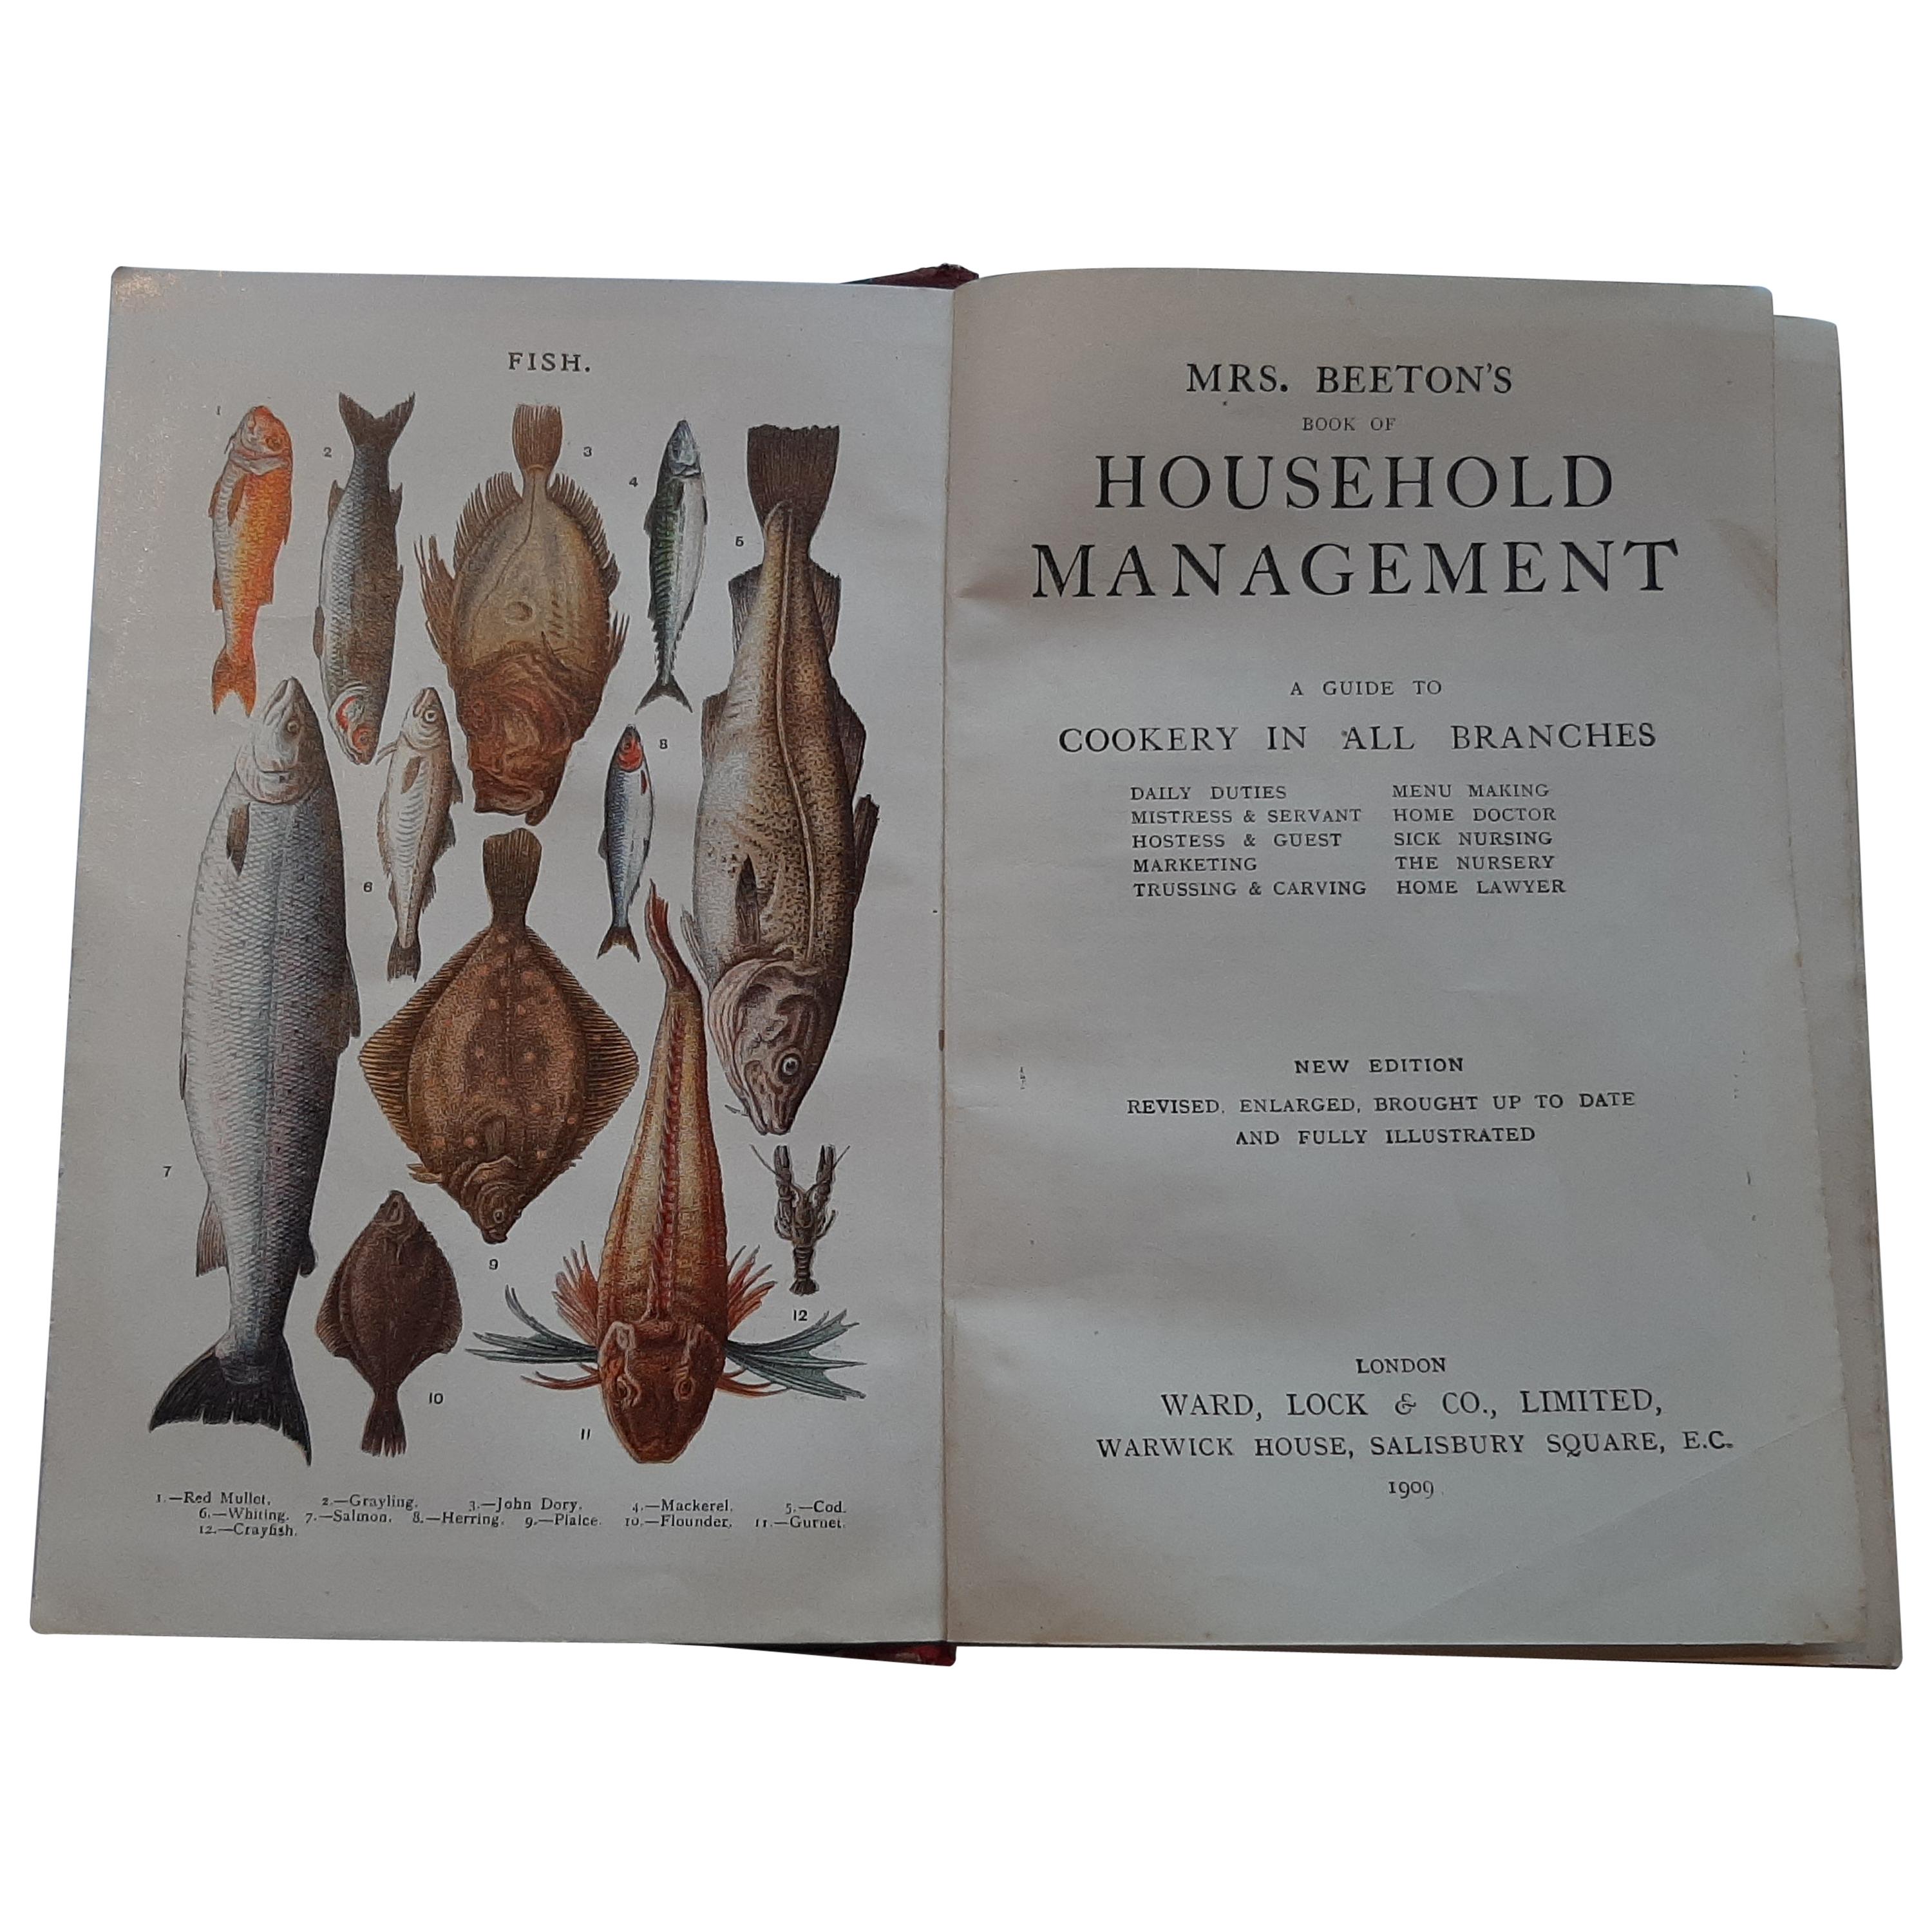 The Book of Household Management '1909 Edition' by Beeton